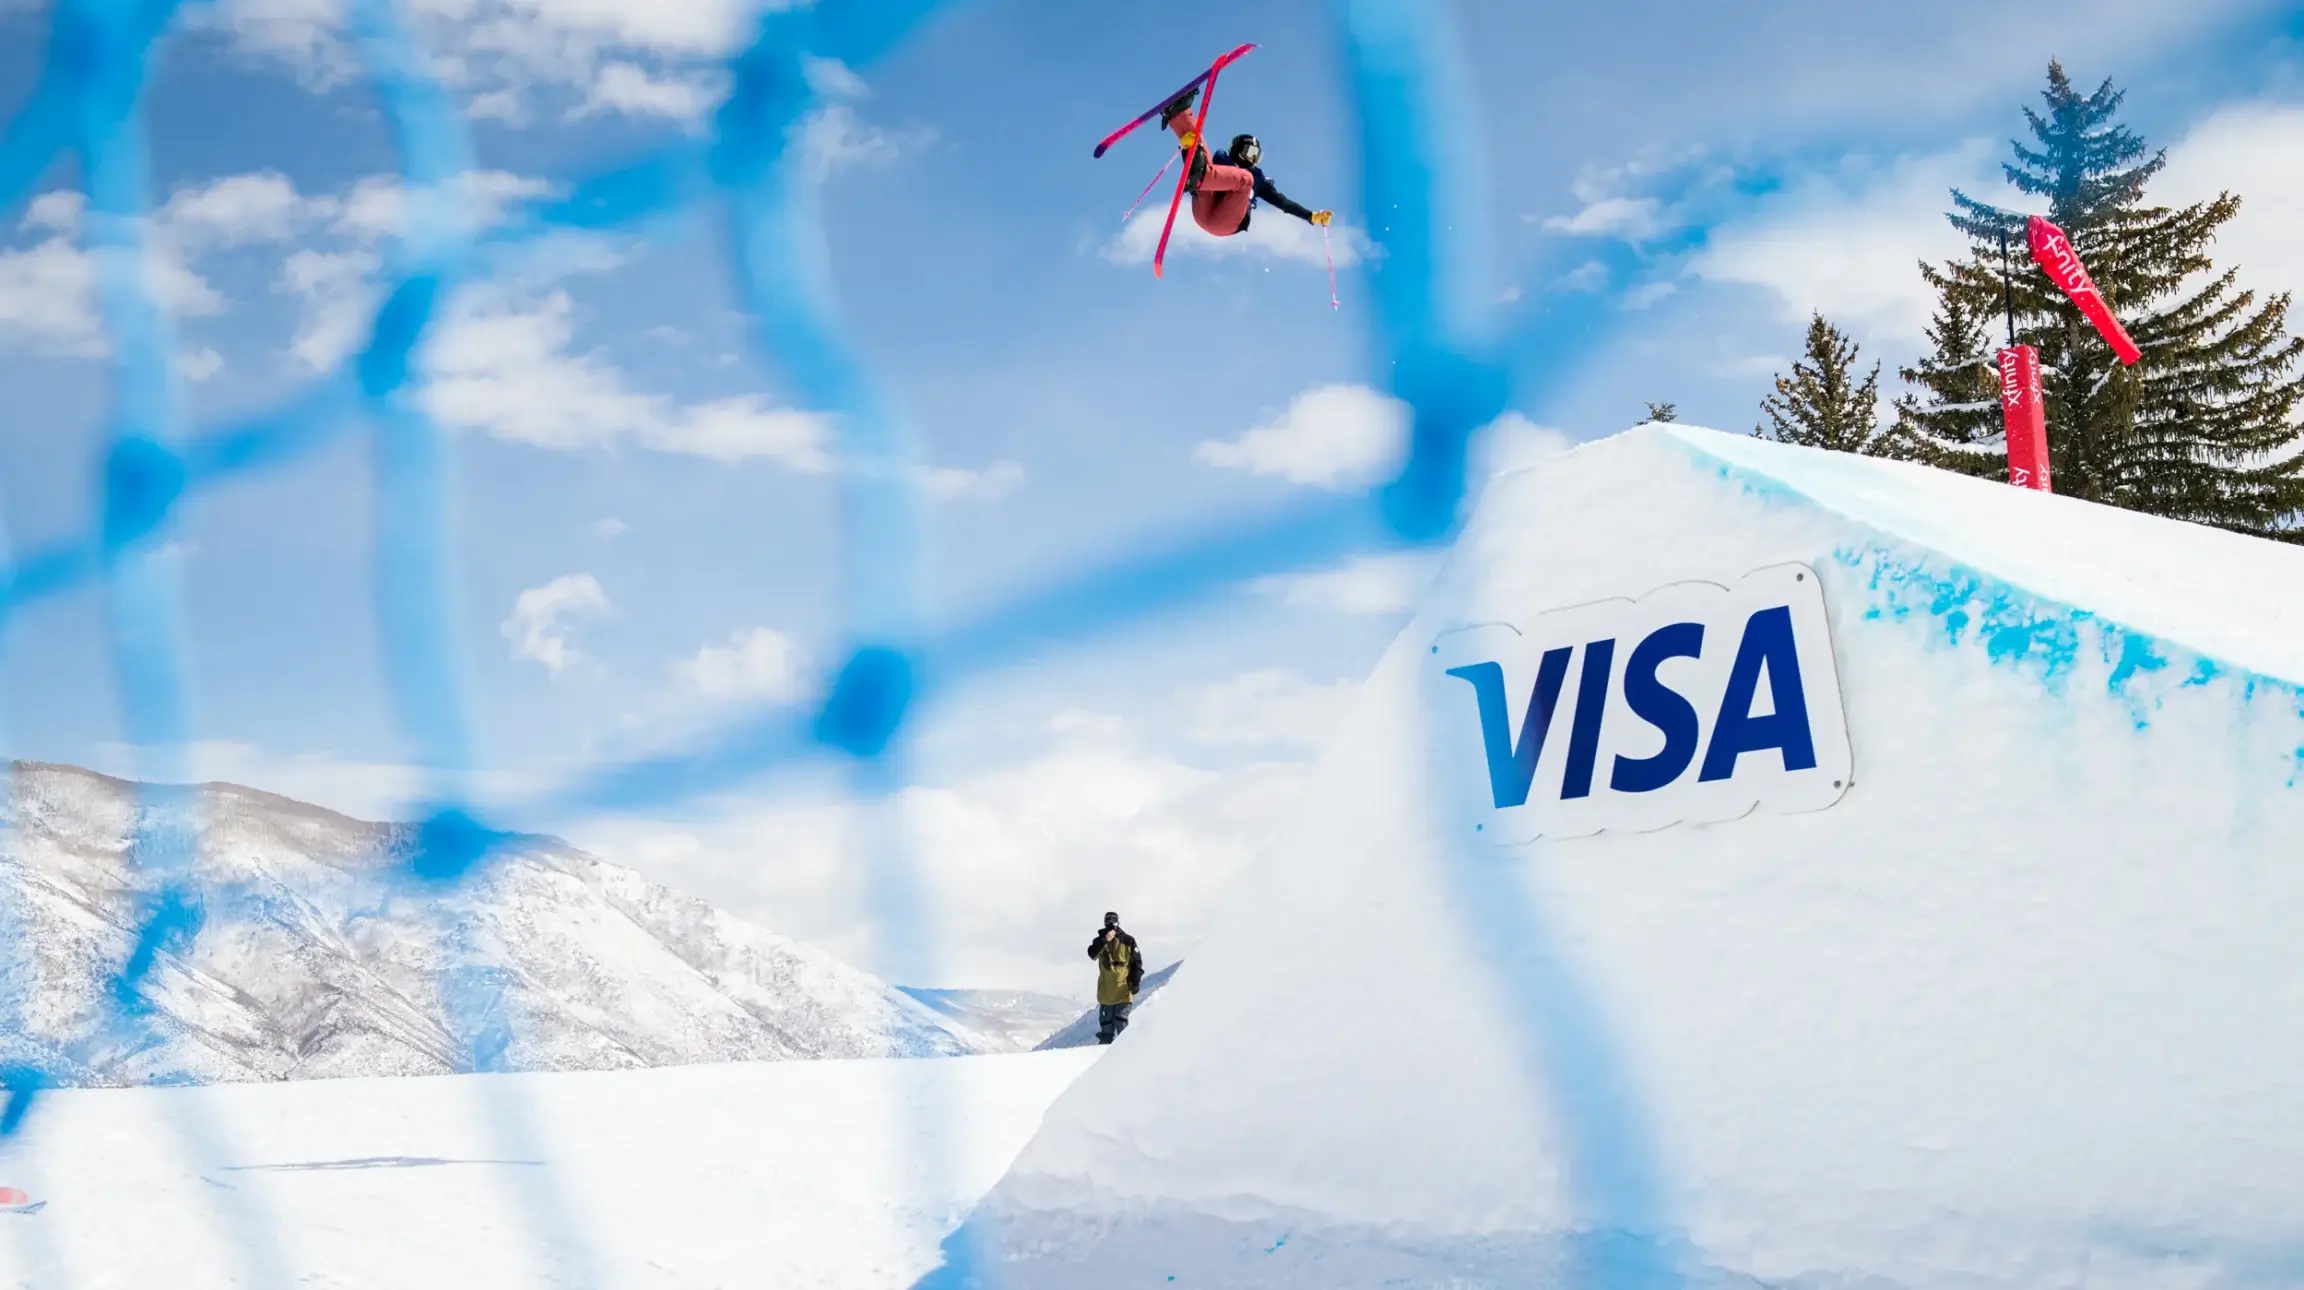 FIS-Freestyle-Ski-and-Snowboarding-World-Cup